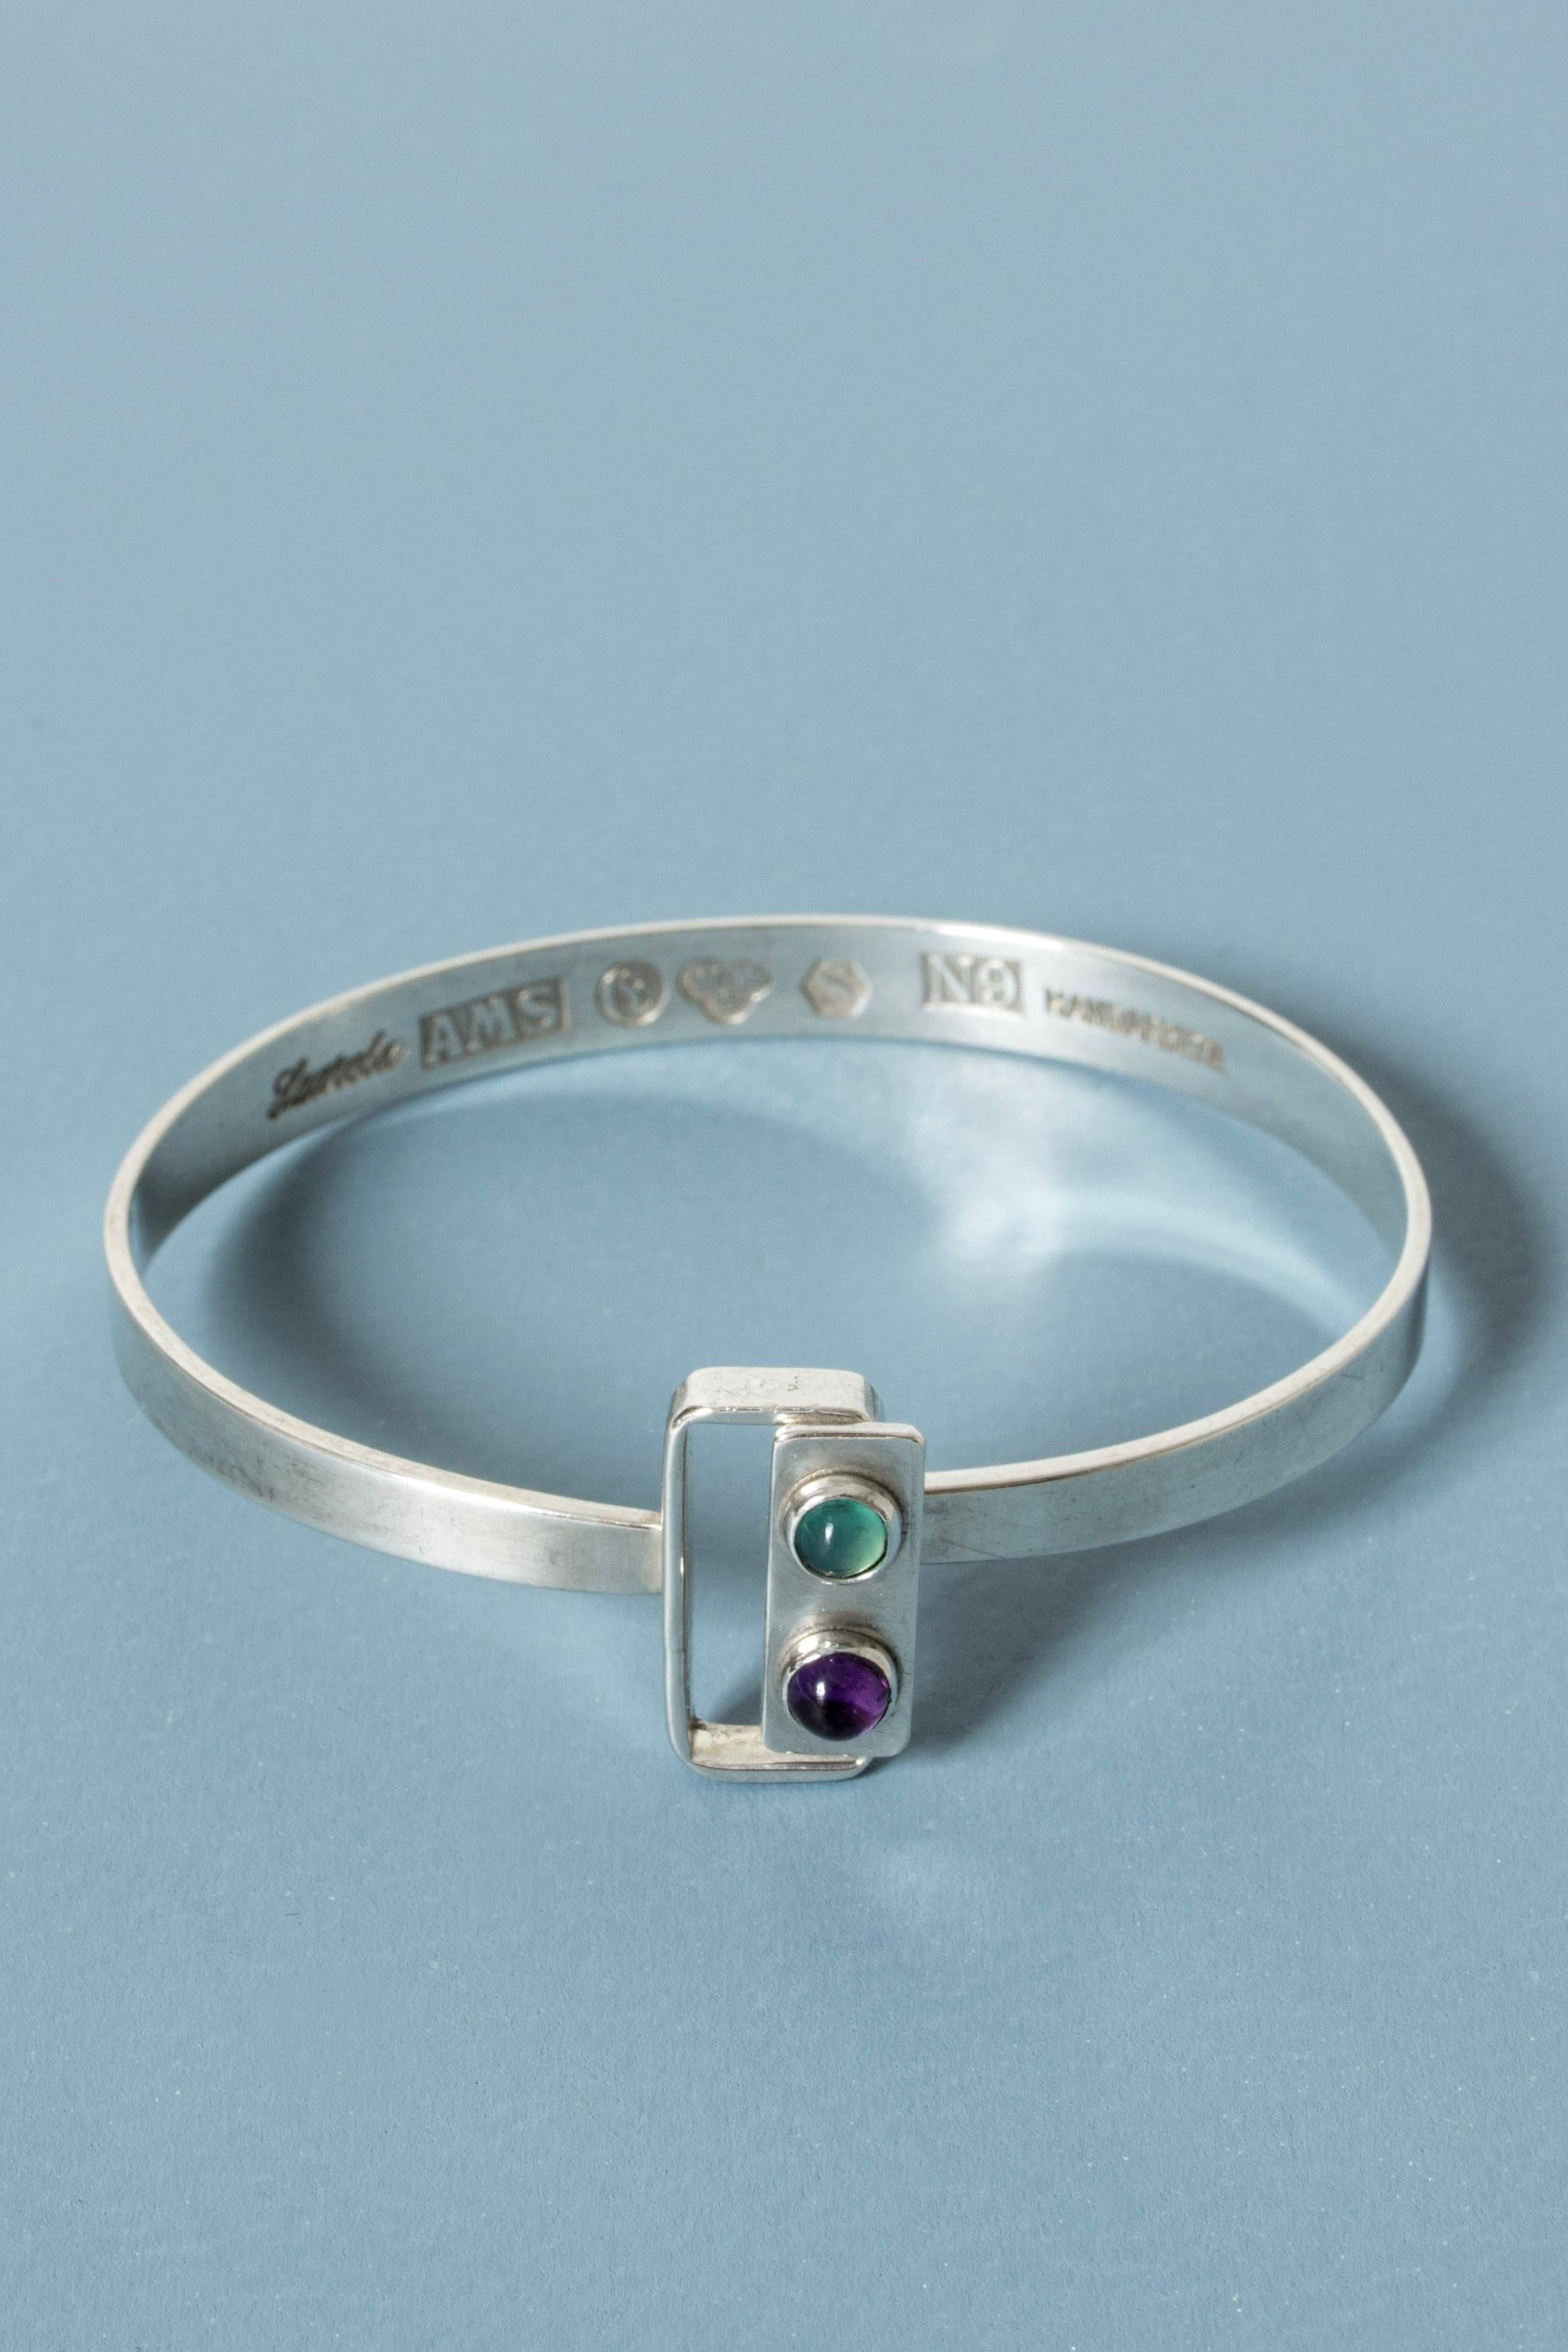 Lovely silver bracelet by Arvo Saarela, with two round cut amethyst and tourmaline stones on the clever lock. Neat and elegant.